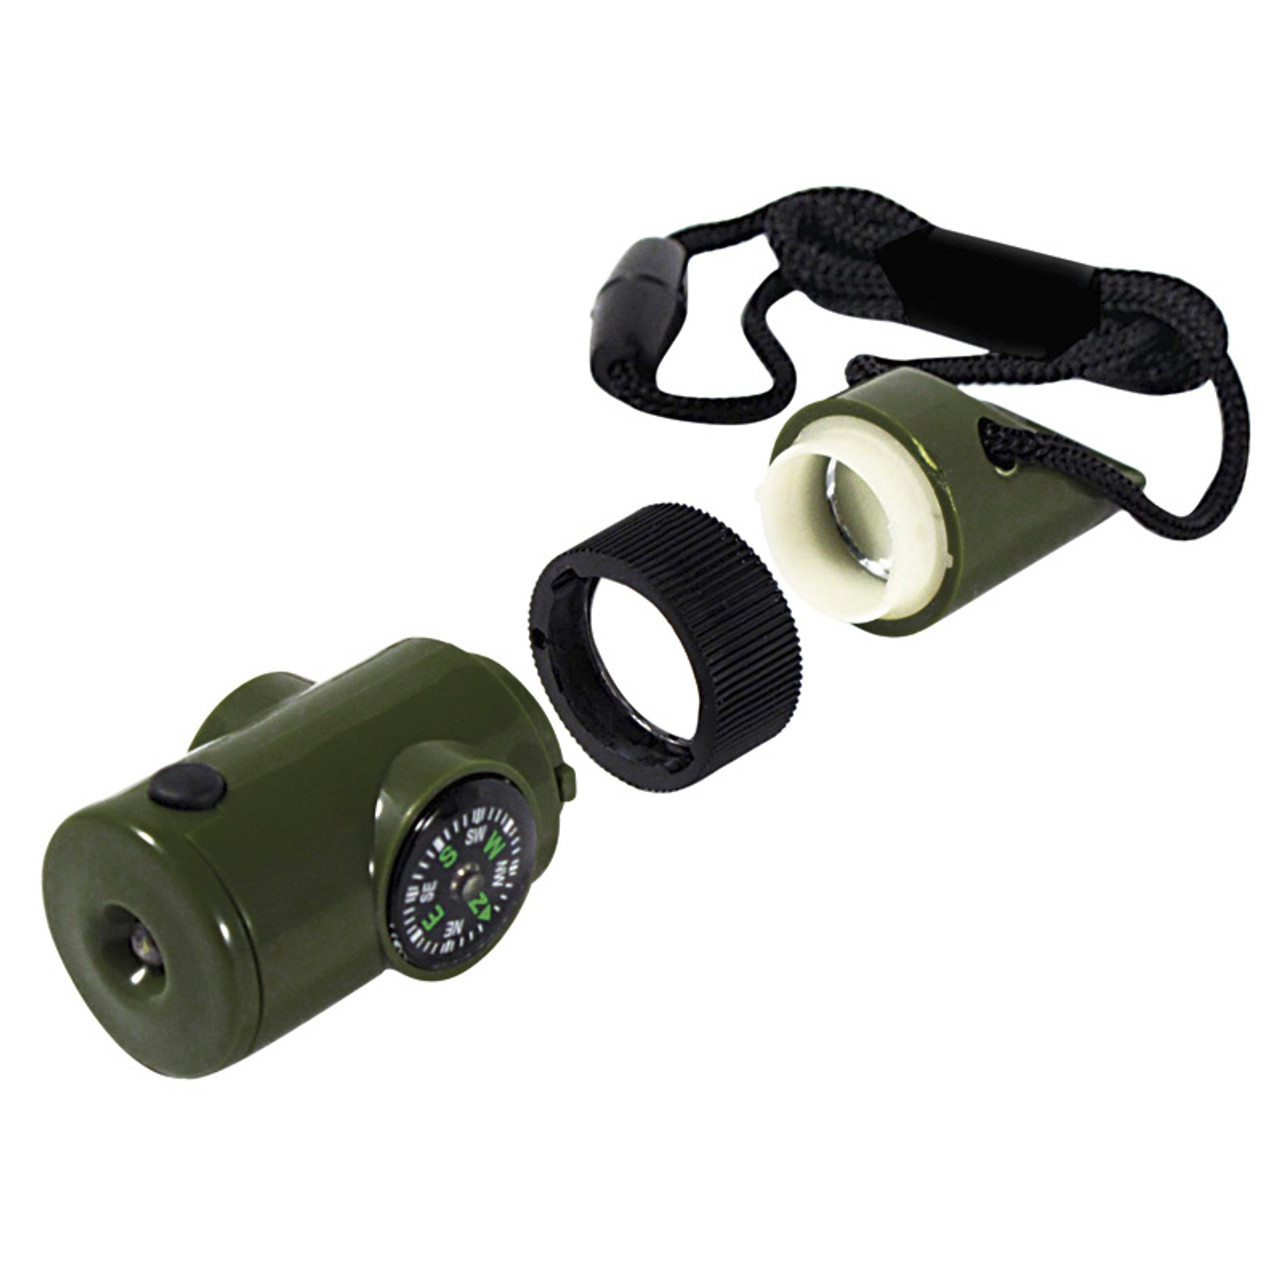 Multi-functional Emergency Survival Whistle With Compass